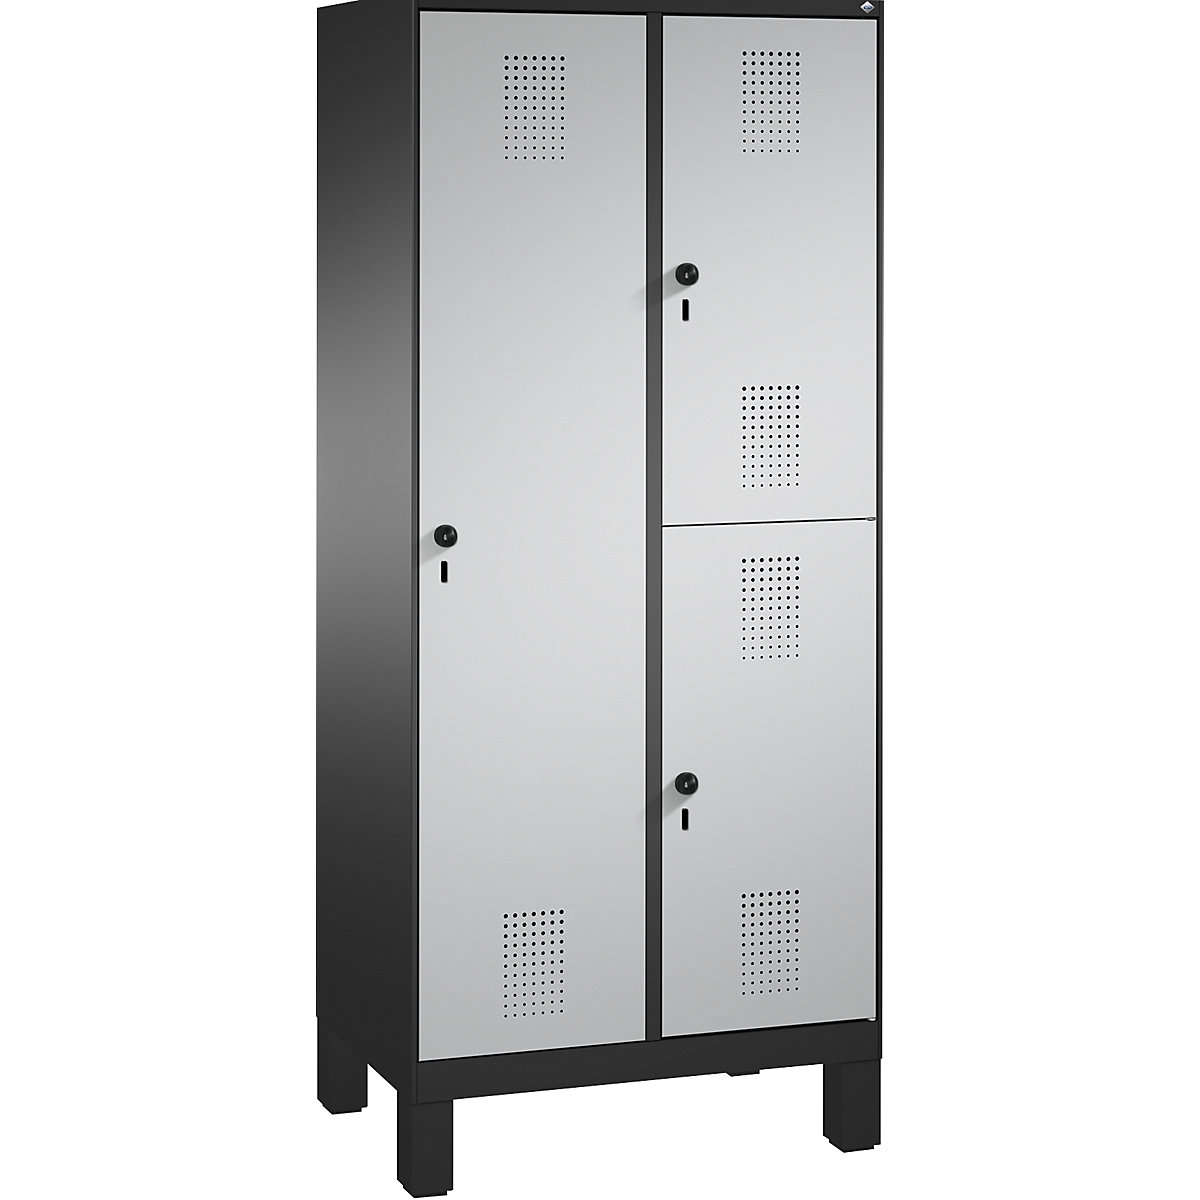 EVOLO combination cupboard, single and double tier – C+P, 2 compartments, 3 doors, compartment width 400 mm, with feet, black grey / white aluminium